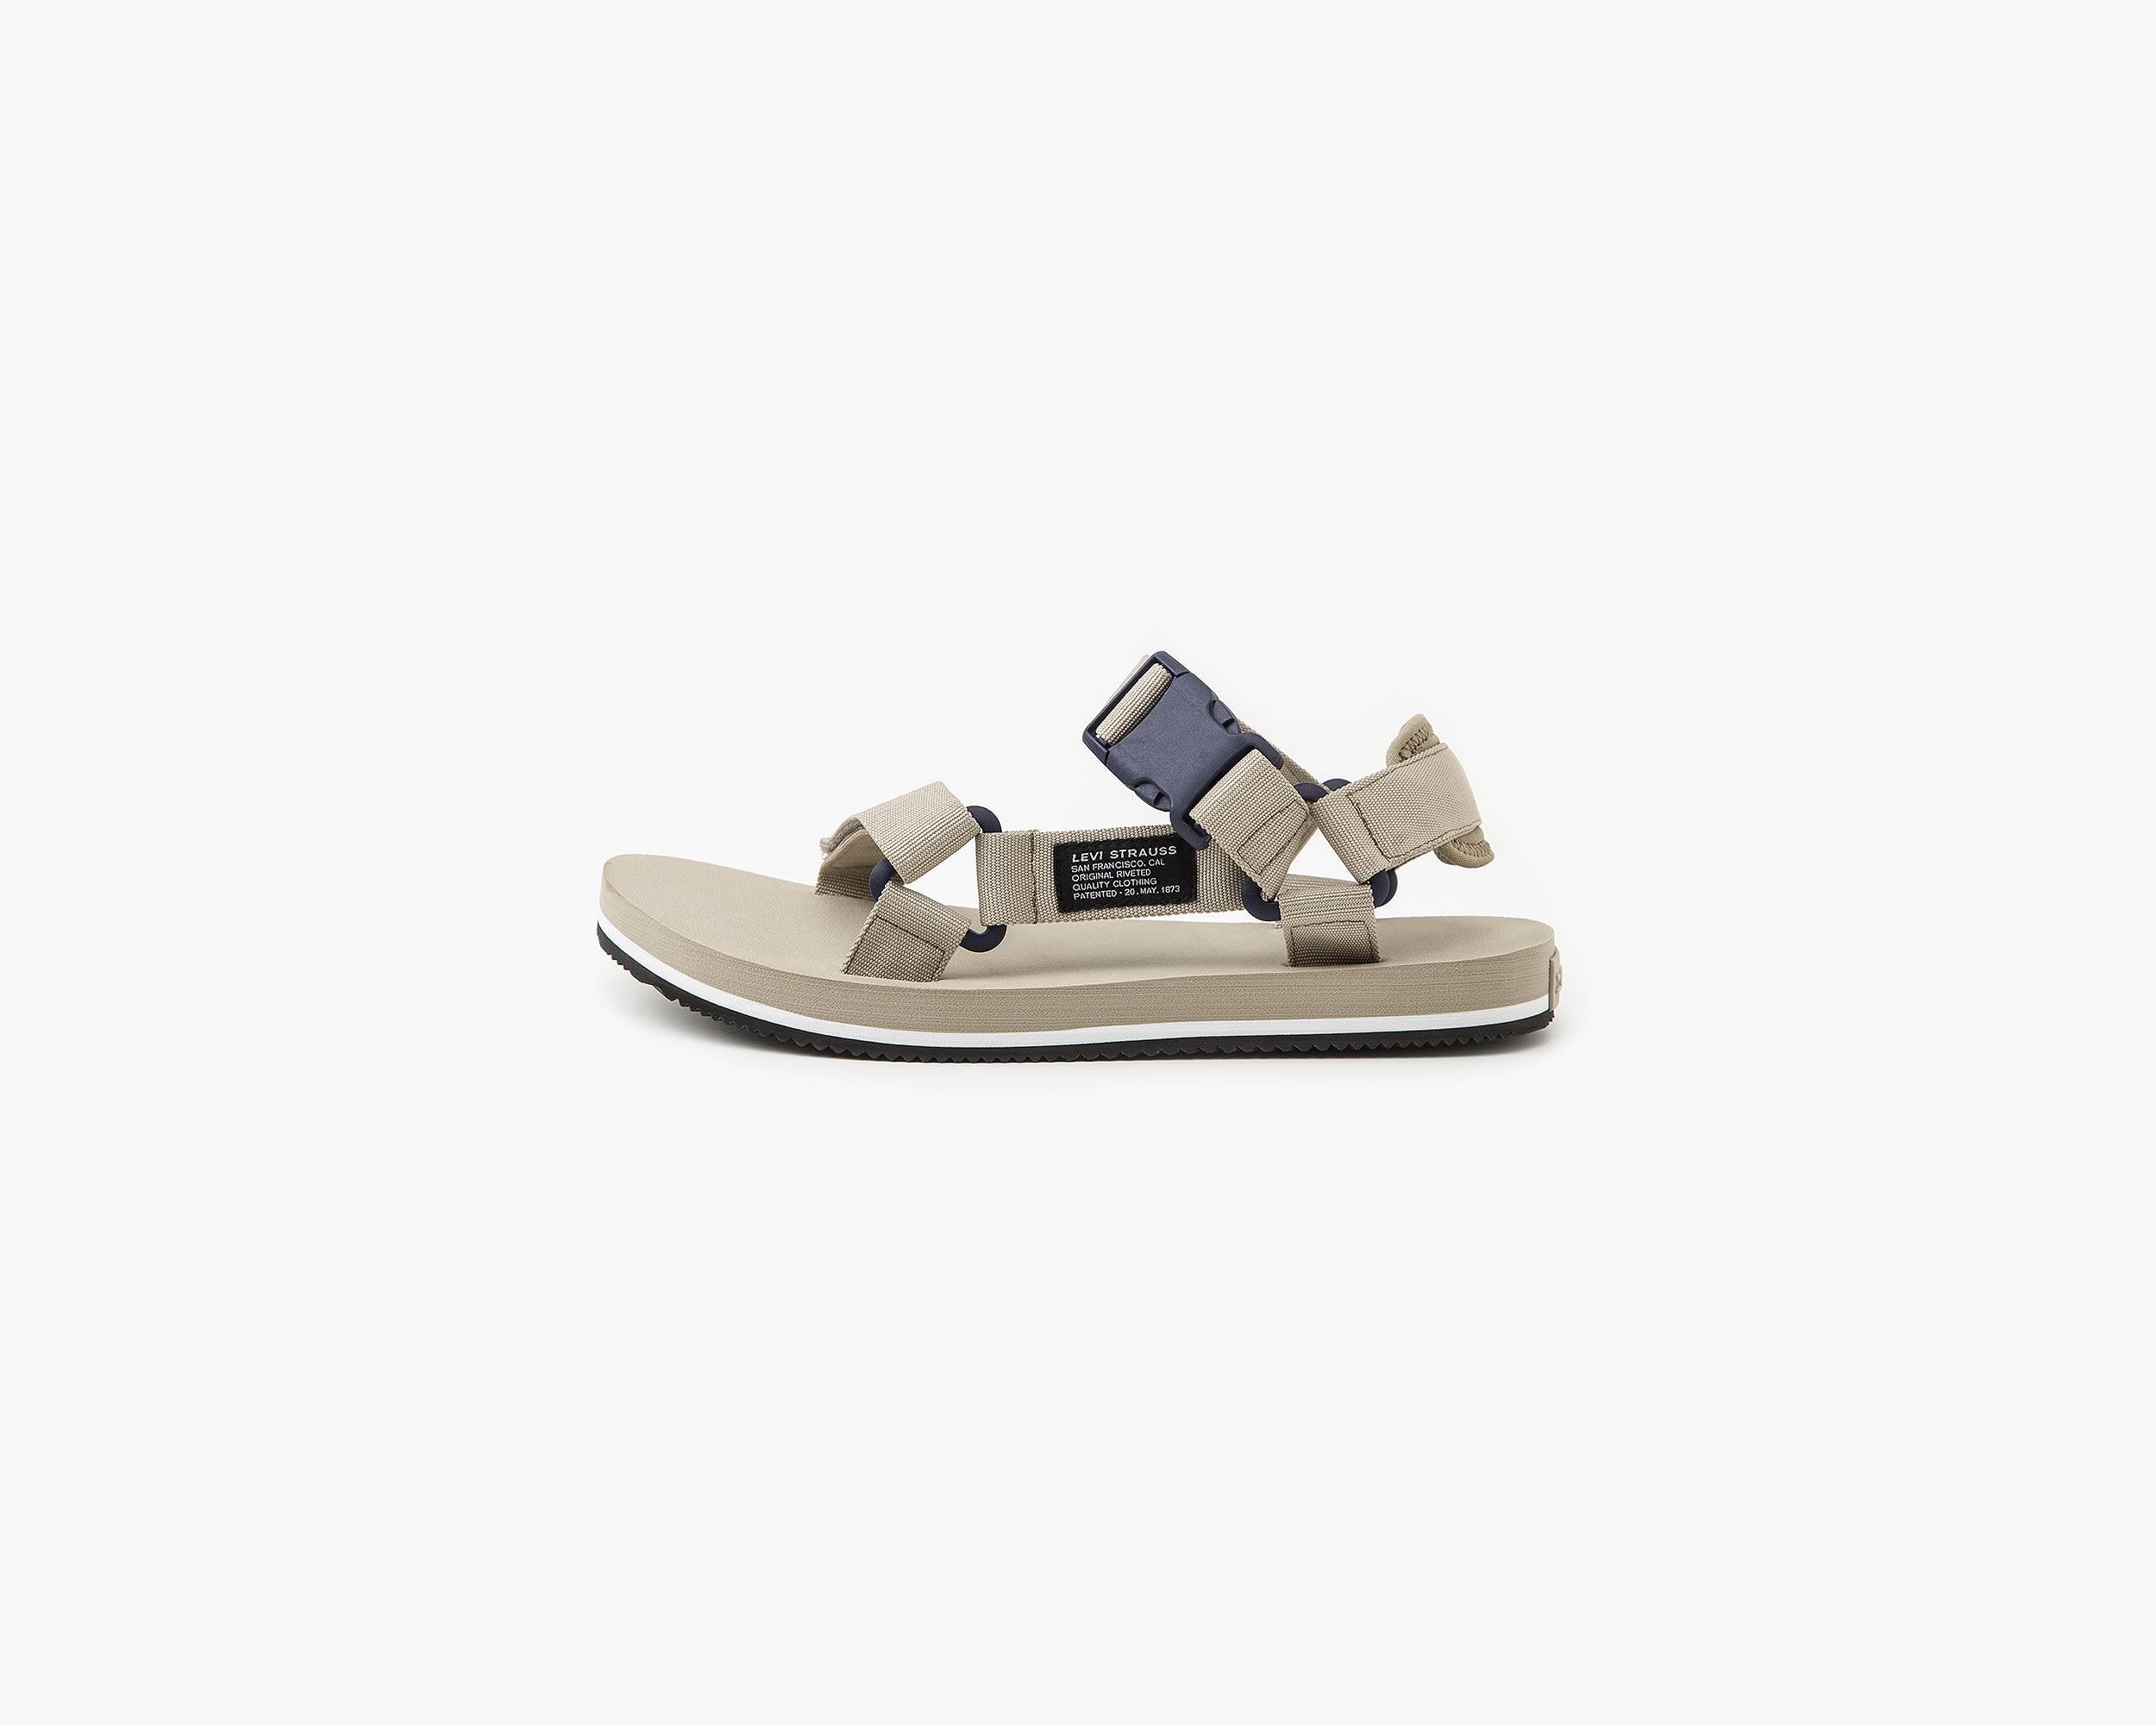 Tahoe Refresh Sandals - Levi's Jeans, Jackets & Clothing